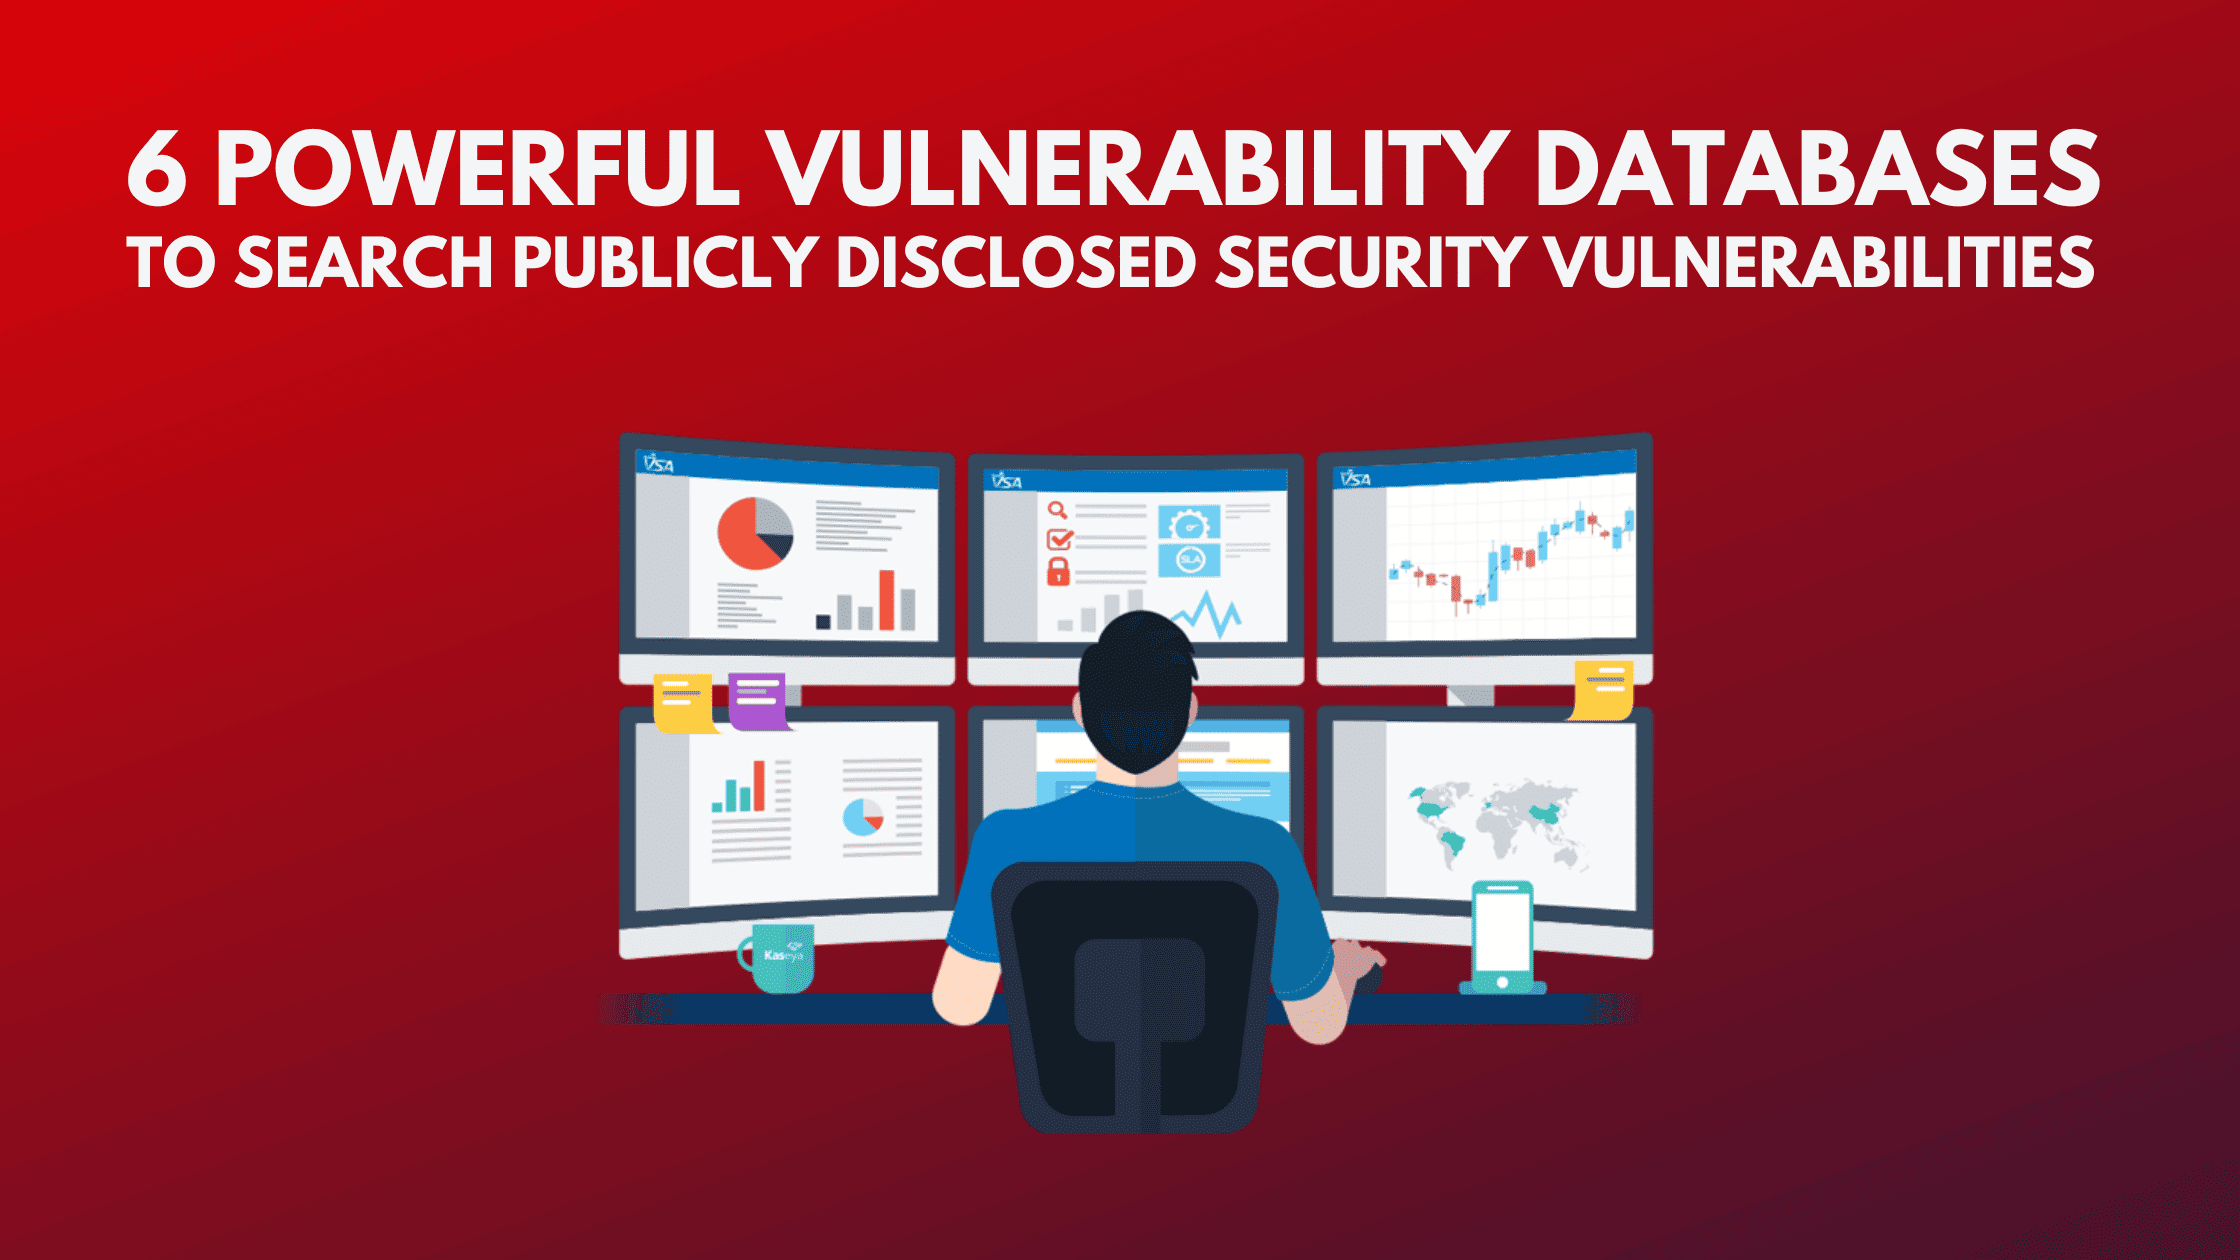 6 Powerful Vulnerability Databases To Search Publicly Disclosed Security Vulnerabilities